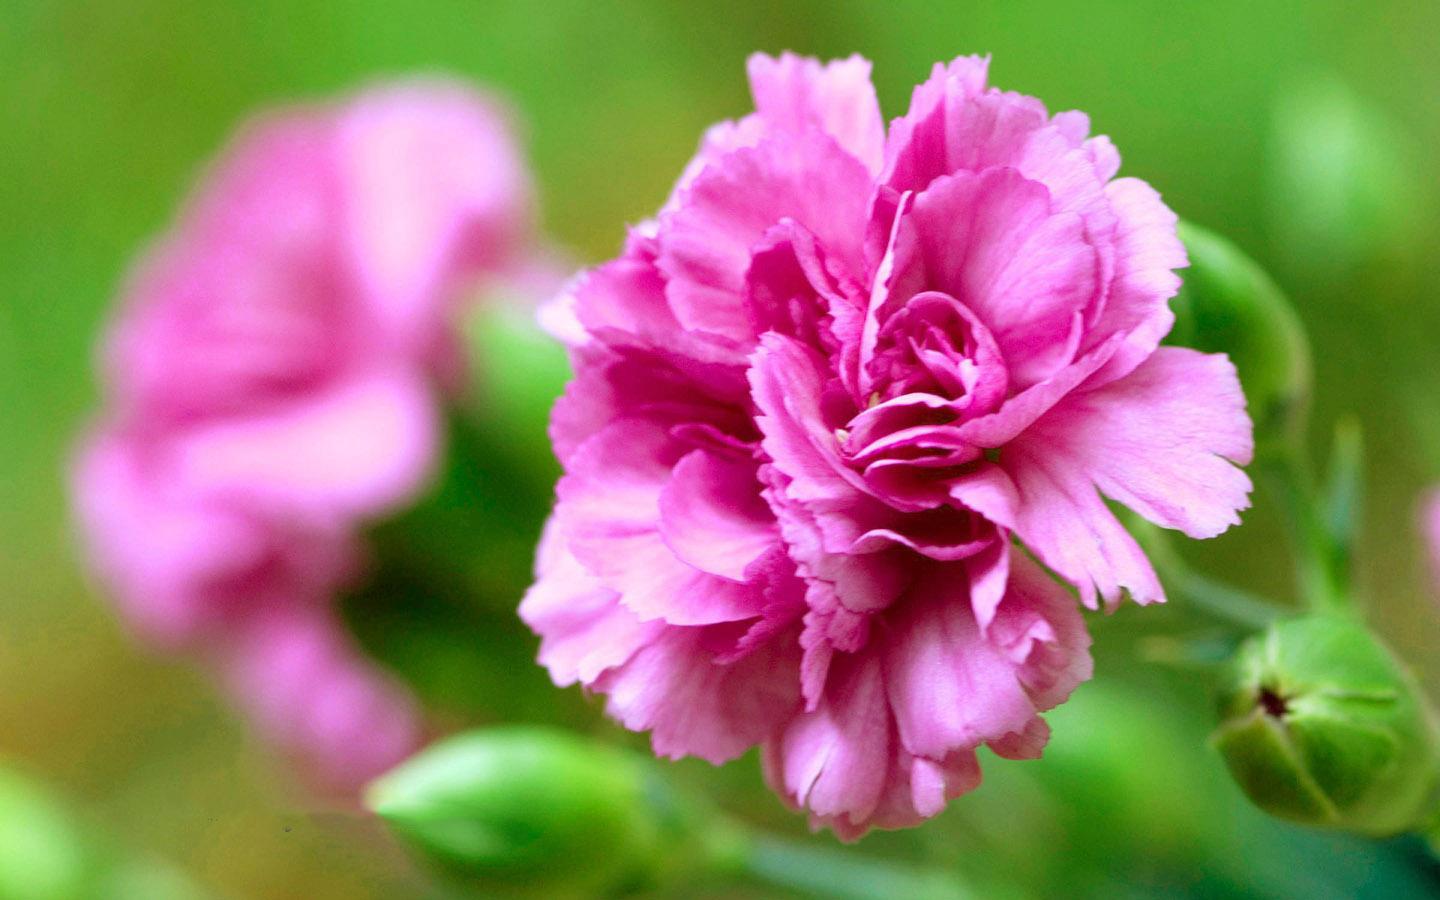 Carnation Market Report by Growth Enablers, Geography, Restraints and Trends